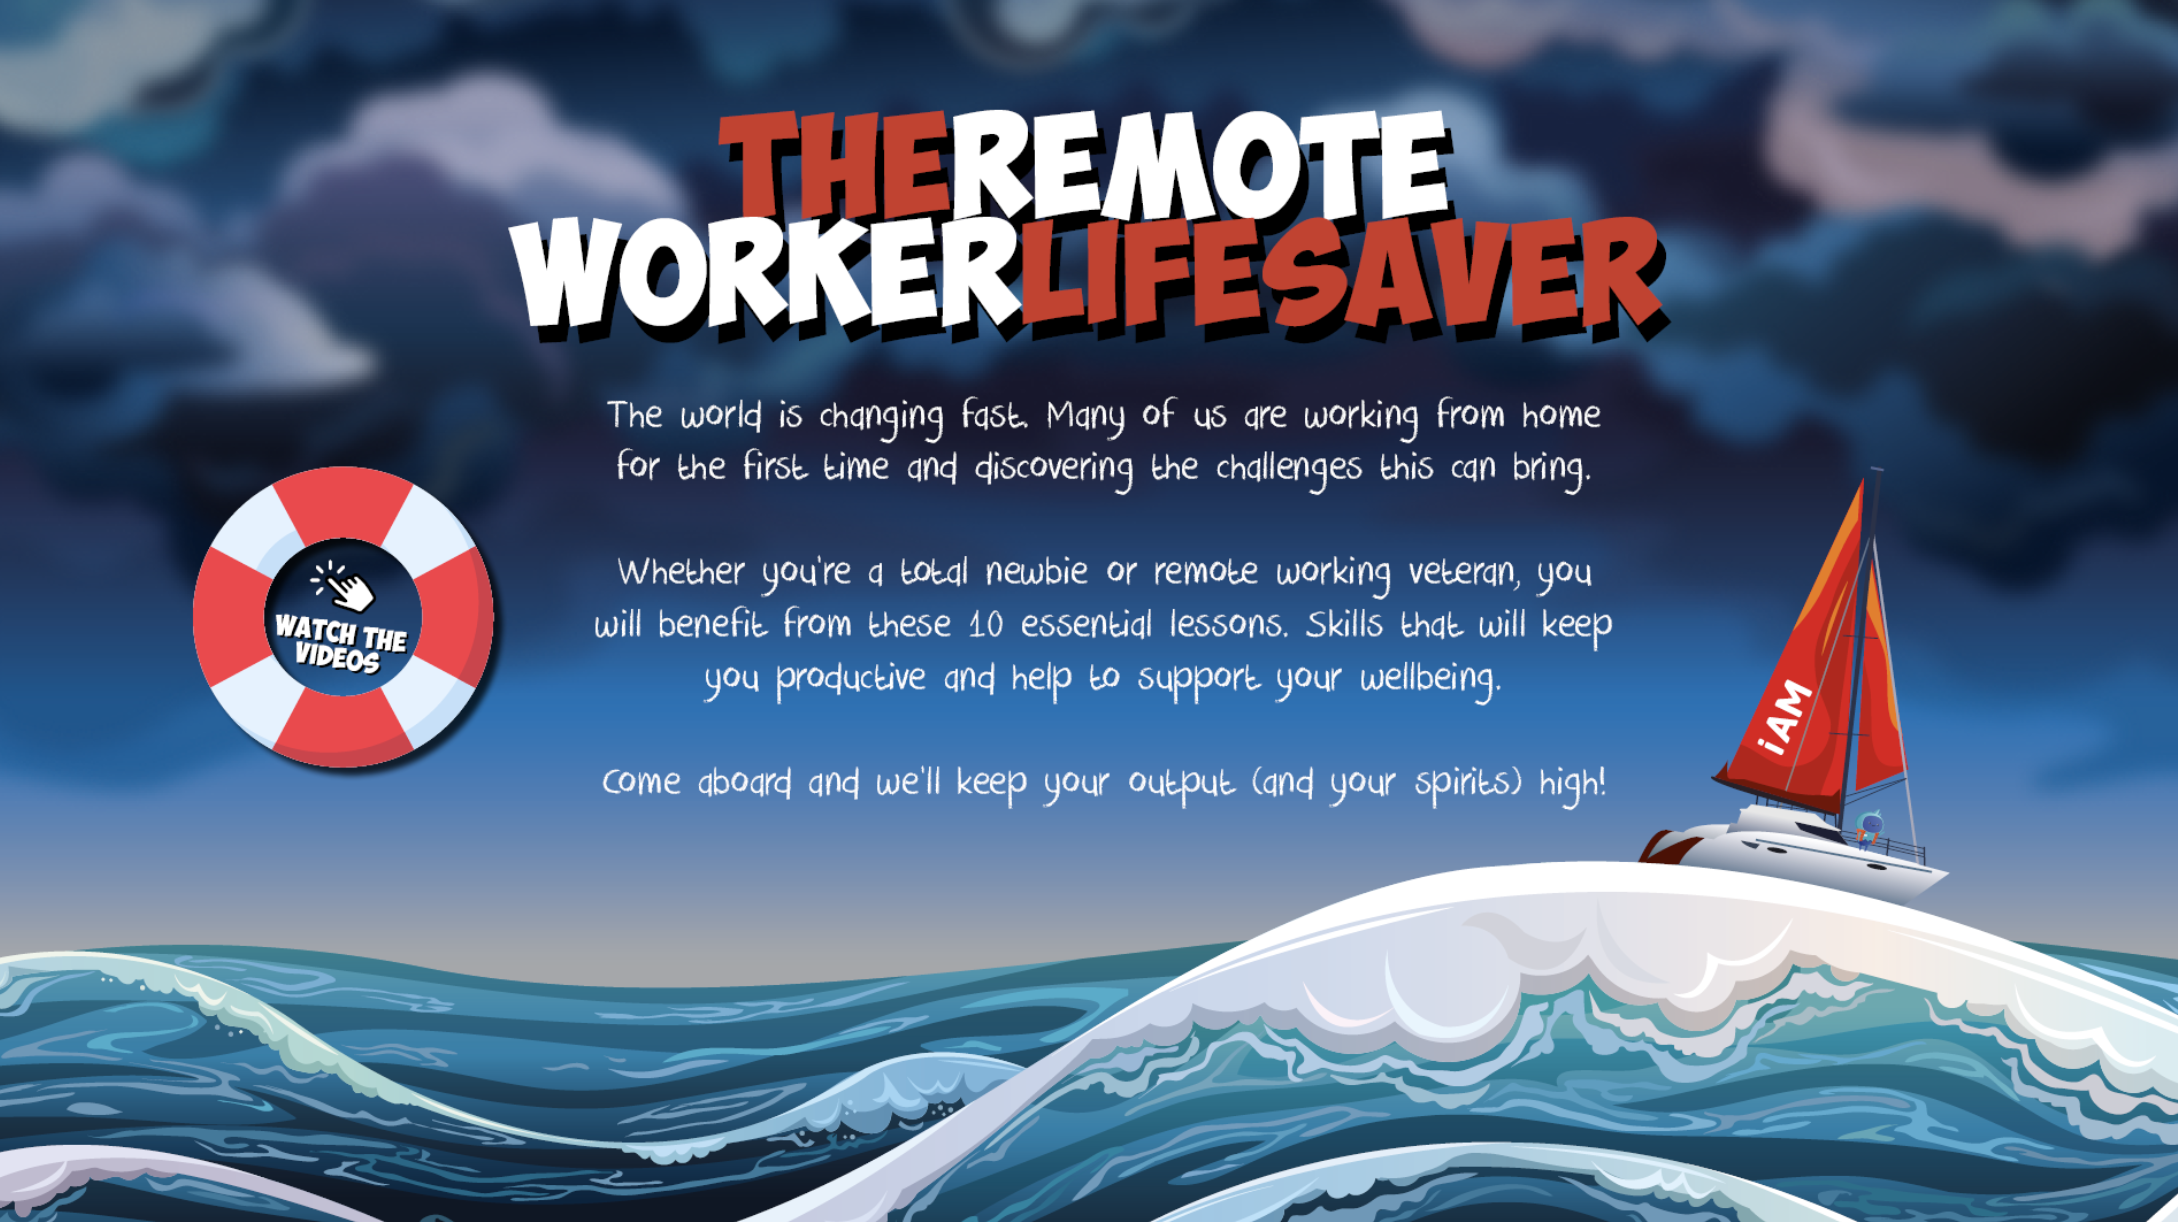 The Remote Worker Lifesaver